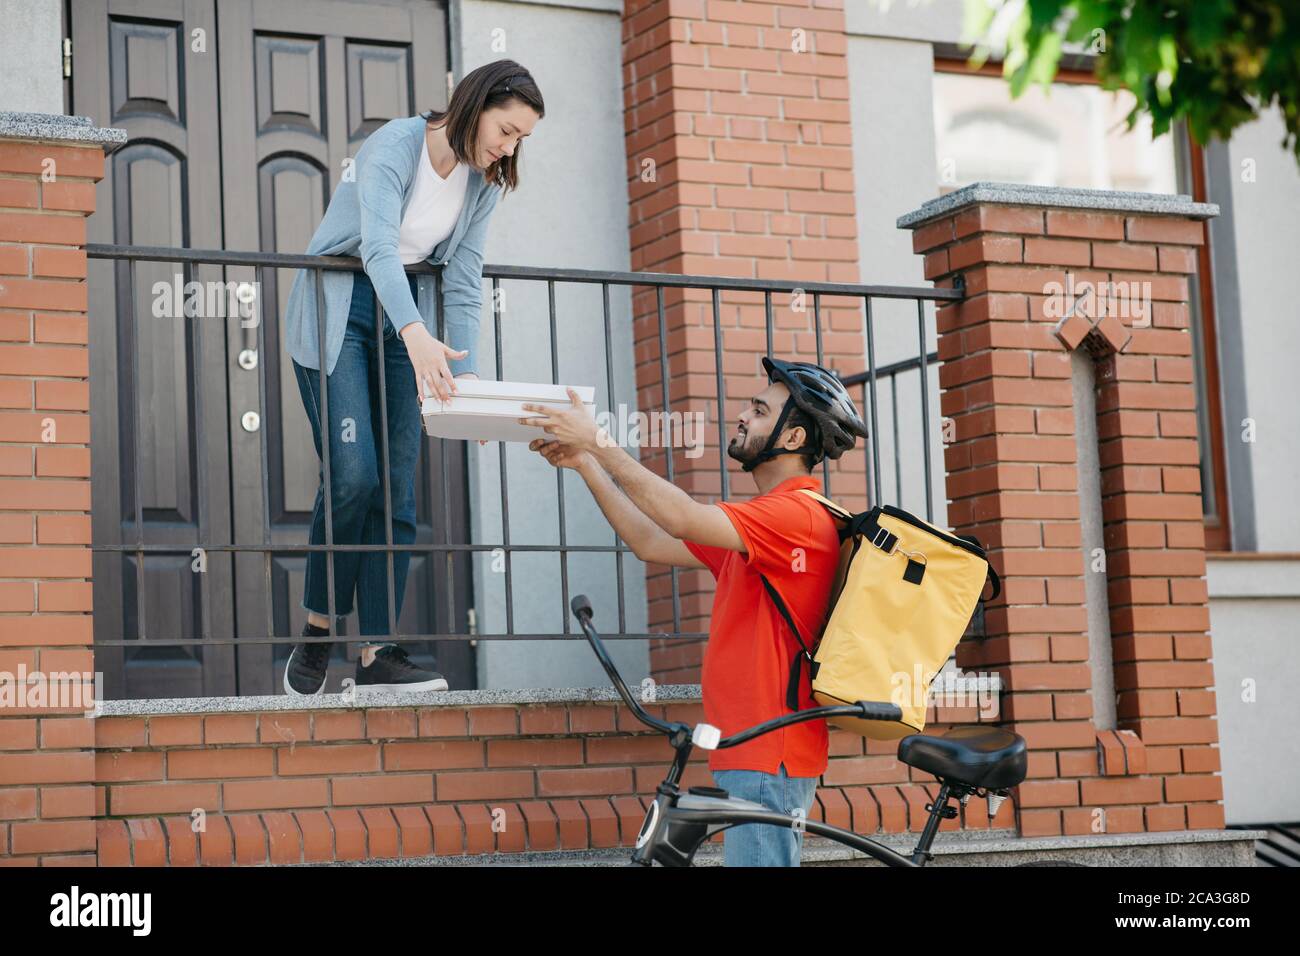 City food delivery service. Woman takes pizza from bicycle courier with helmet and backpack Stock Photo